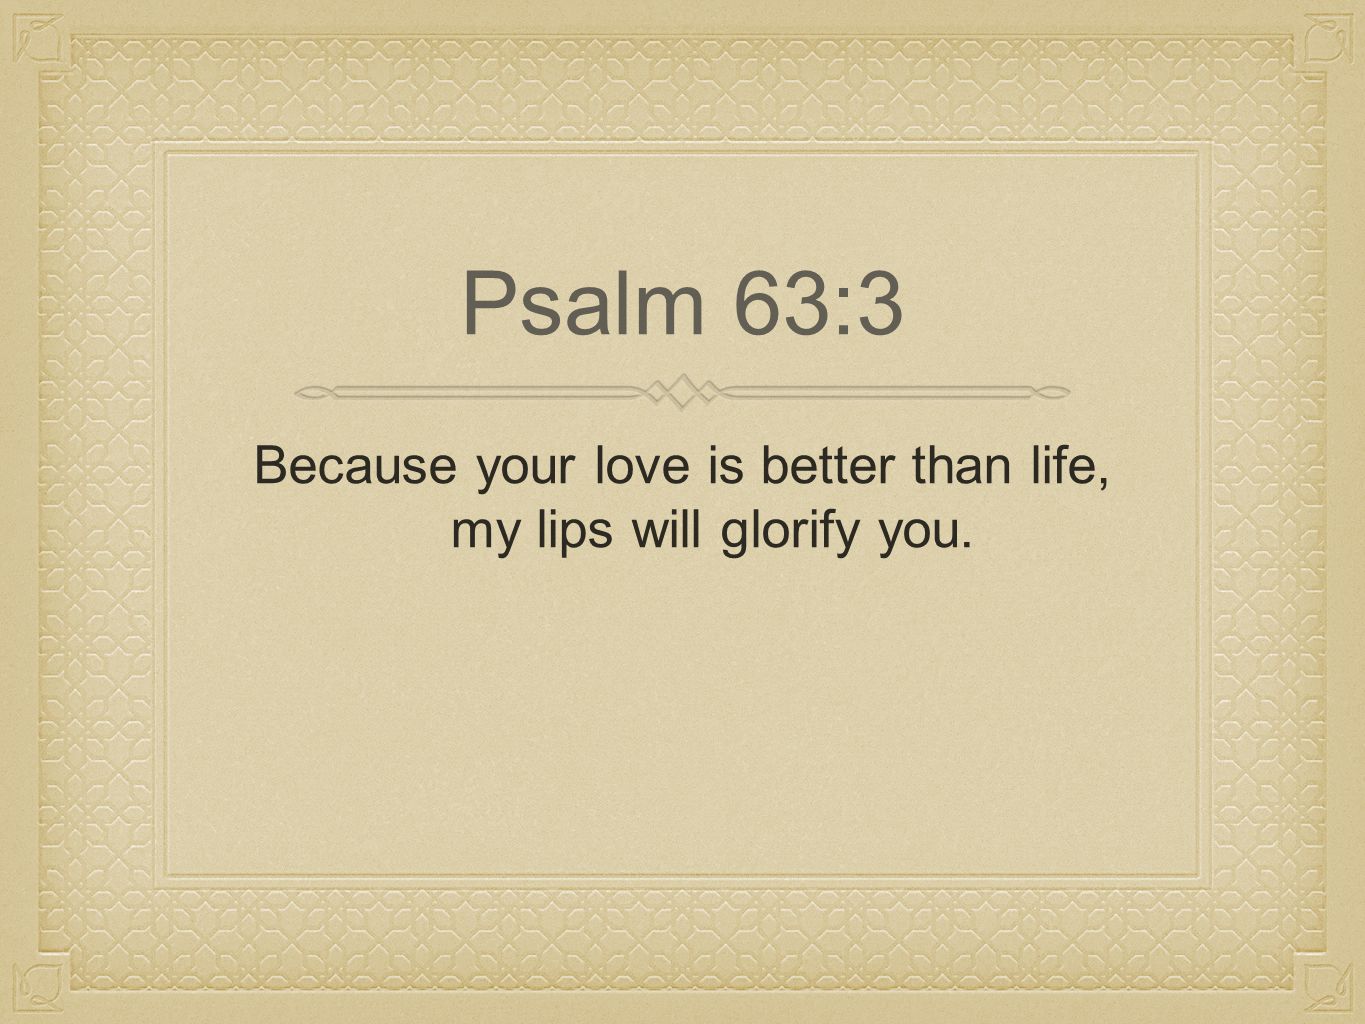 Because your love is better than life, my lips will glorify you. Psalm 63:3